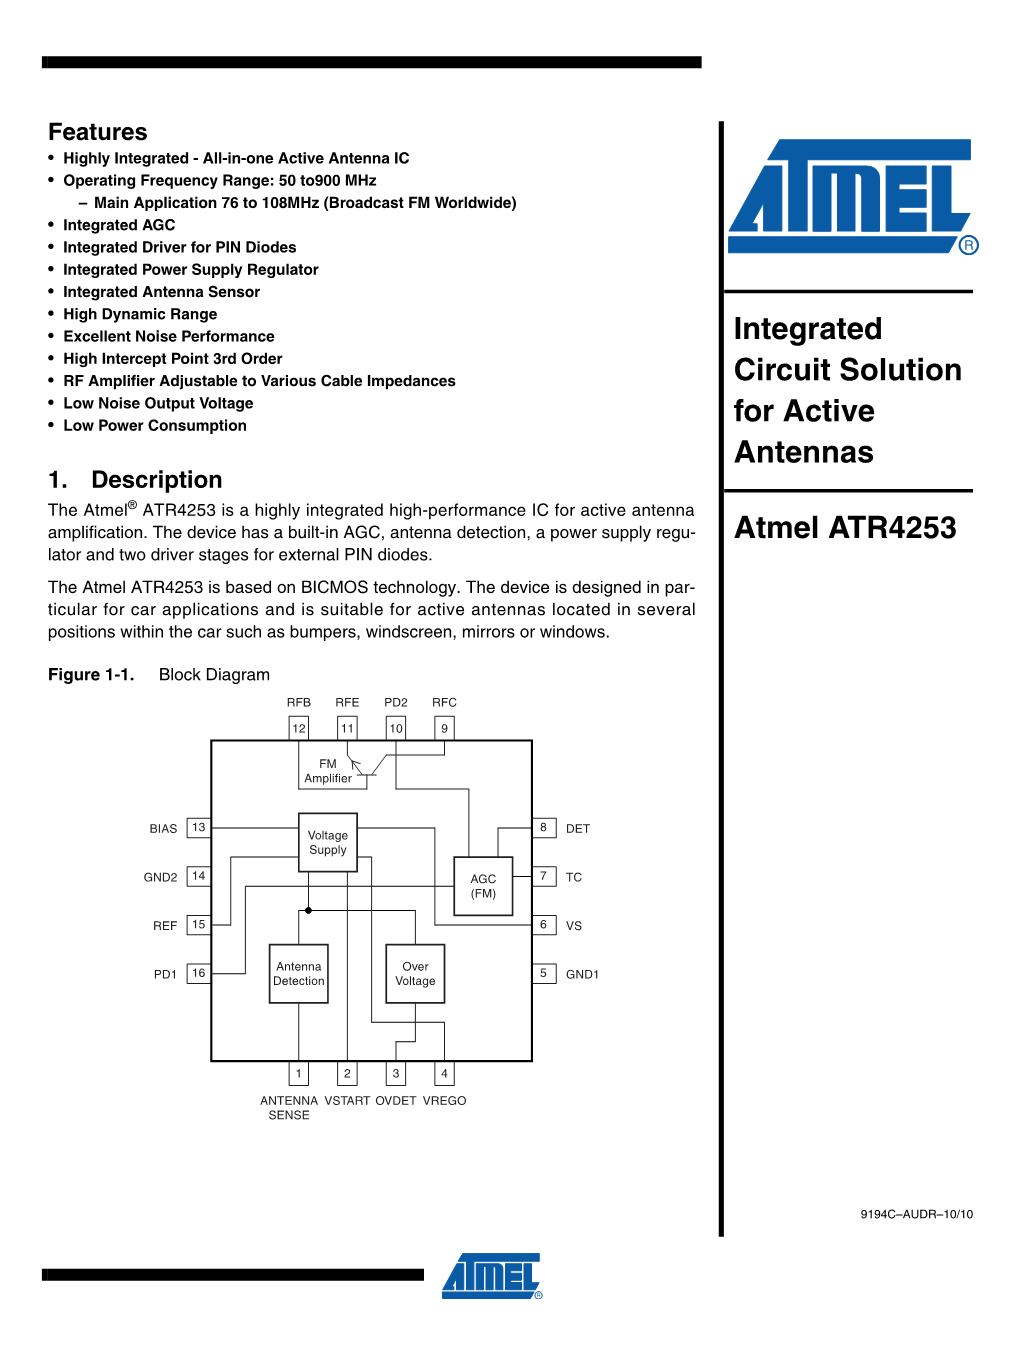 Integrated Circuit Solution for Active Antennas Atmel ATR4253